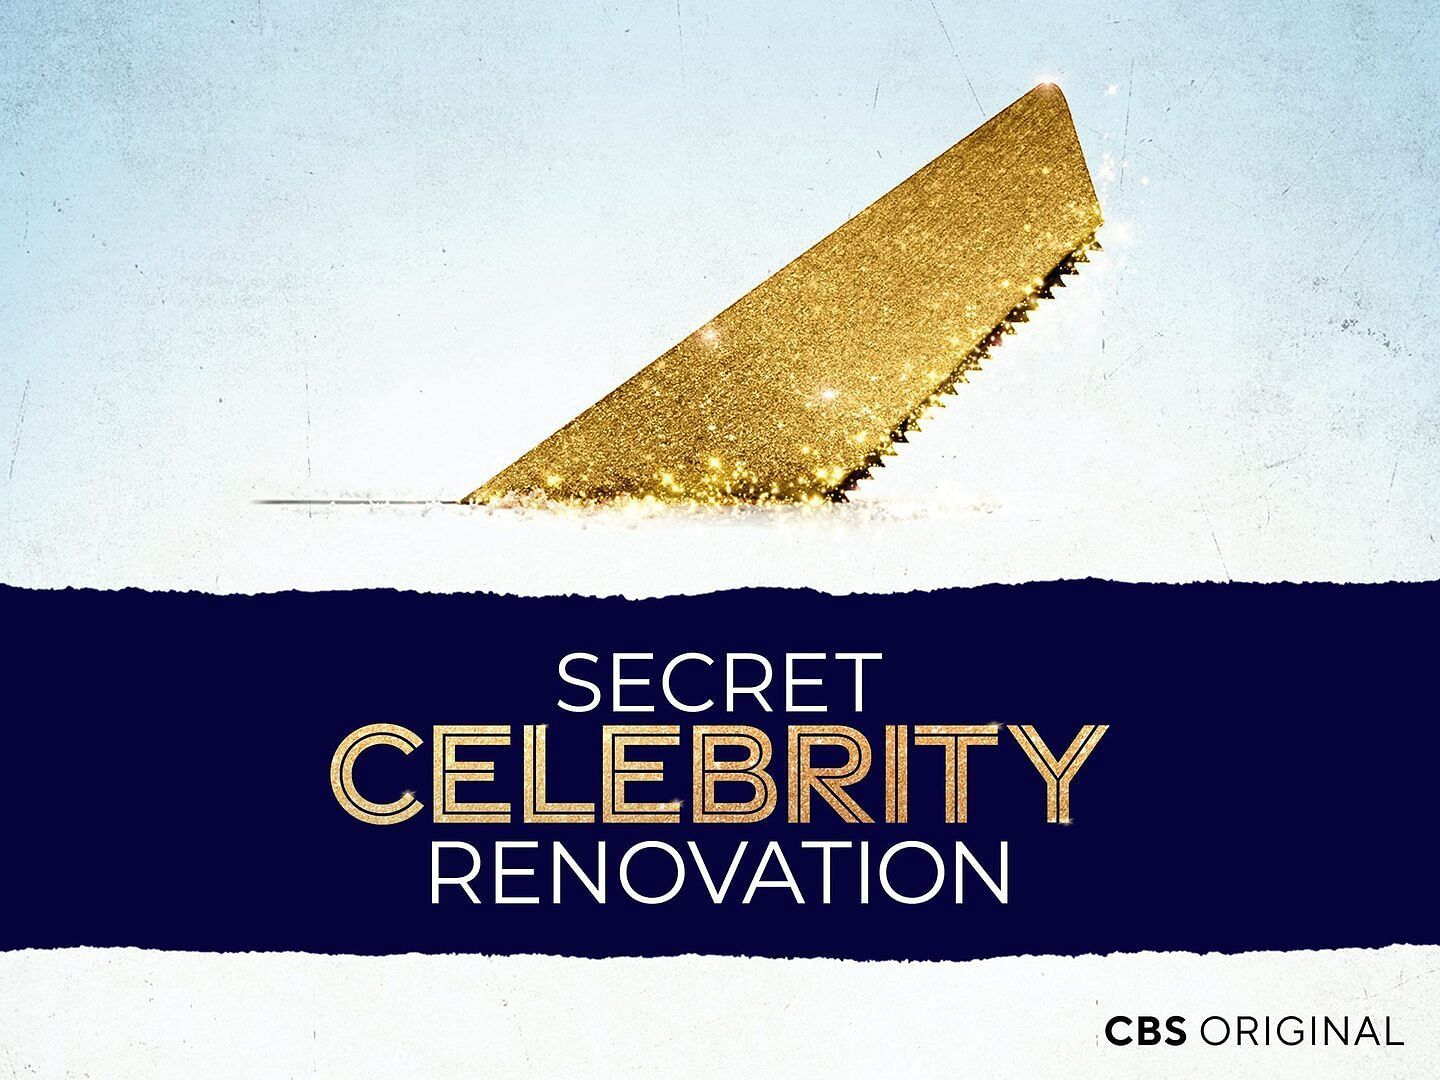 Secret Celebrity Renovation Season 2 will see a host of new celebrities surprising their loved ones with home makeovers (image via CBS network)